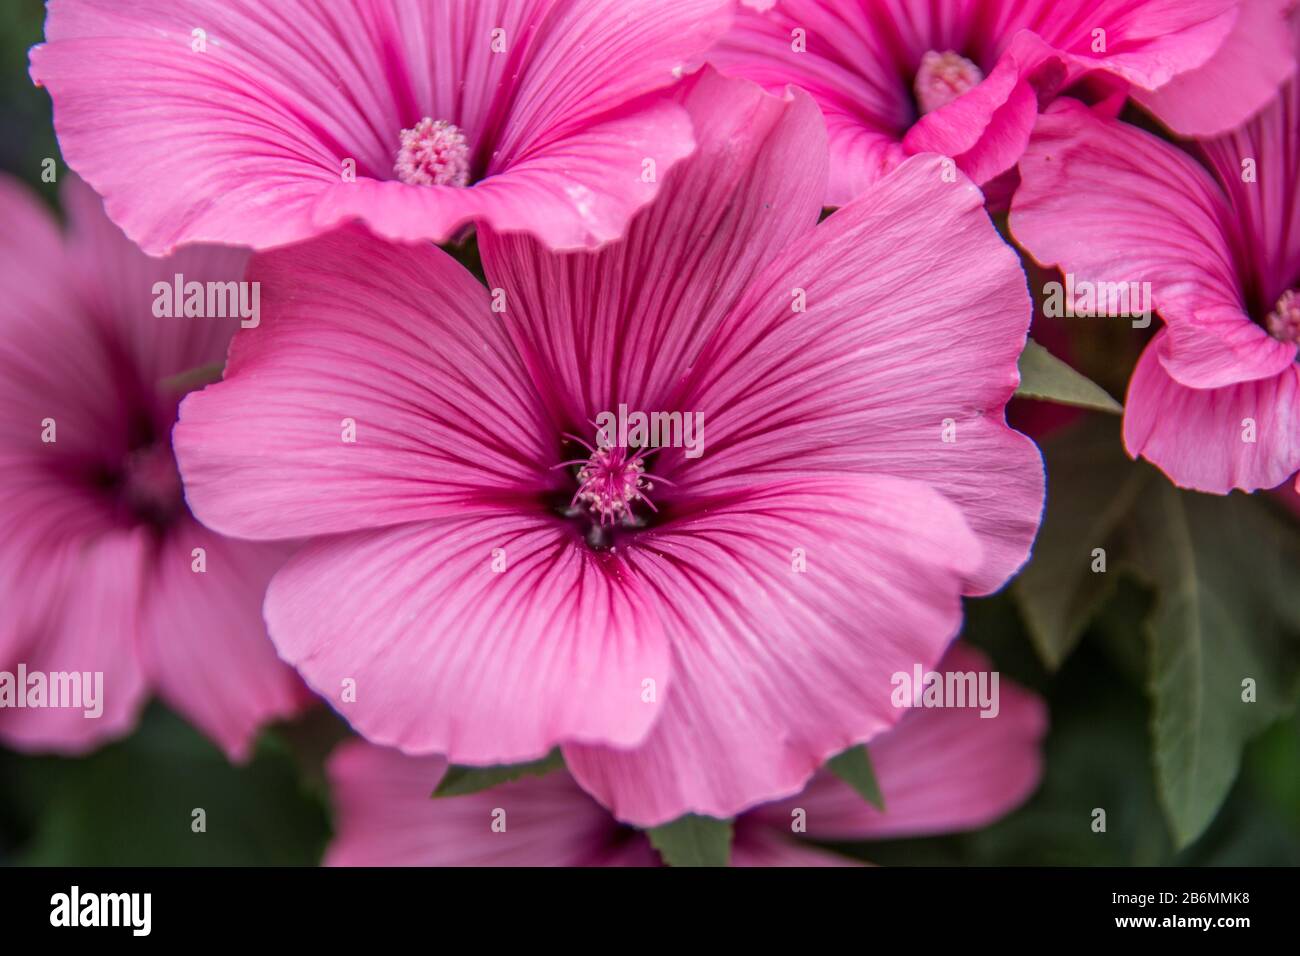 red violet mallow flowers with stamens Stock Photo